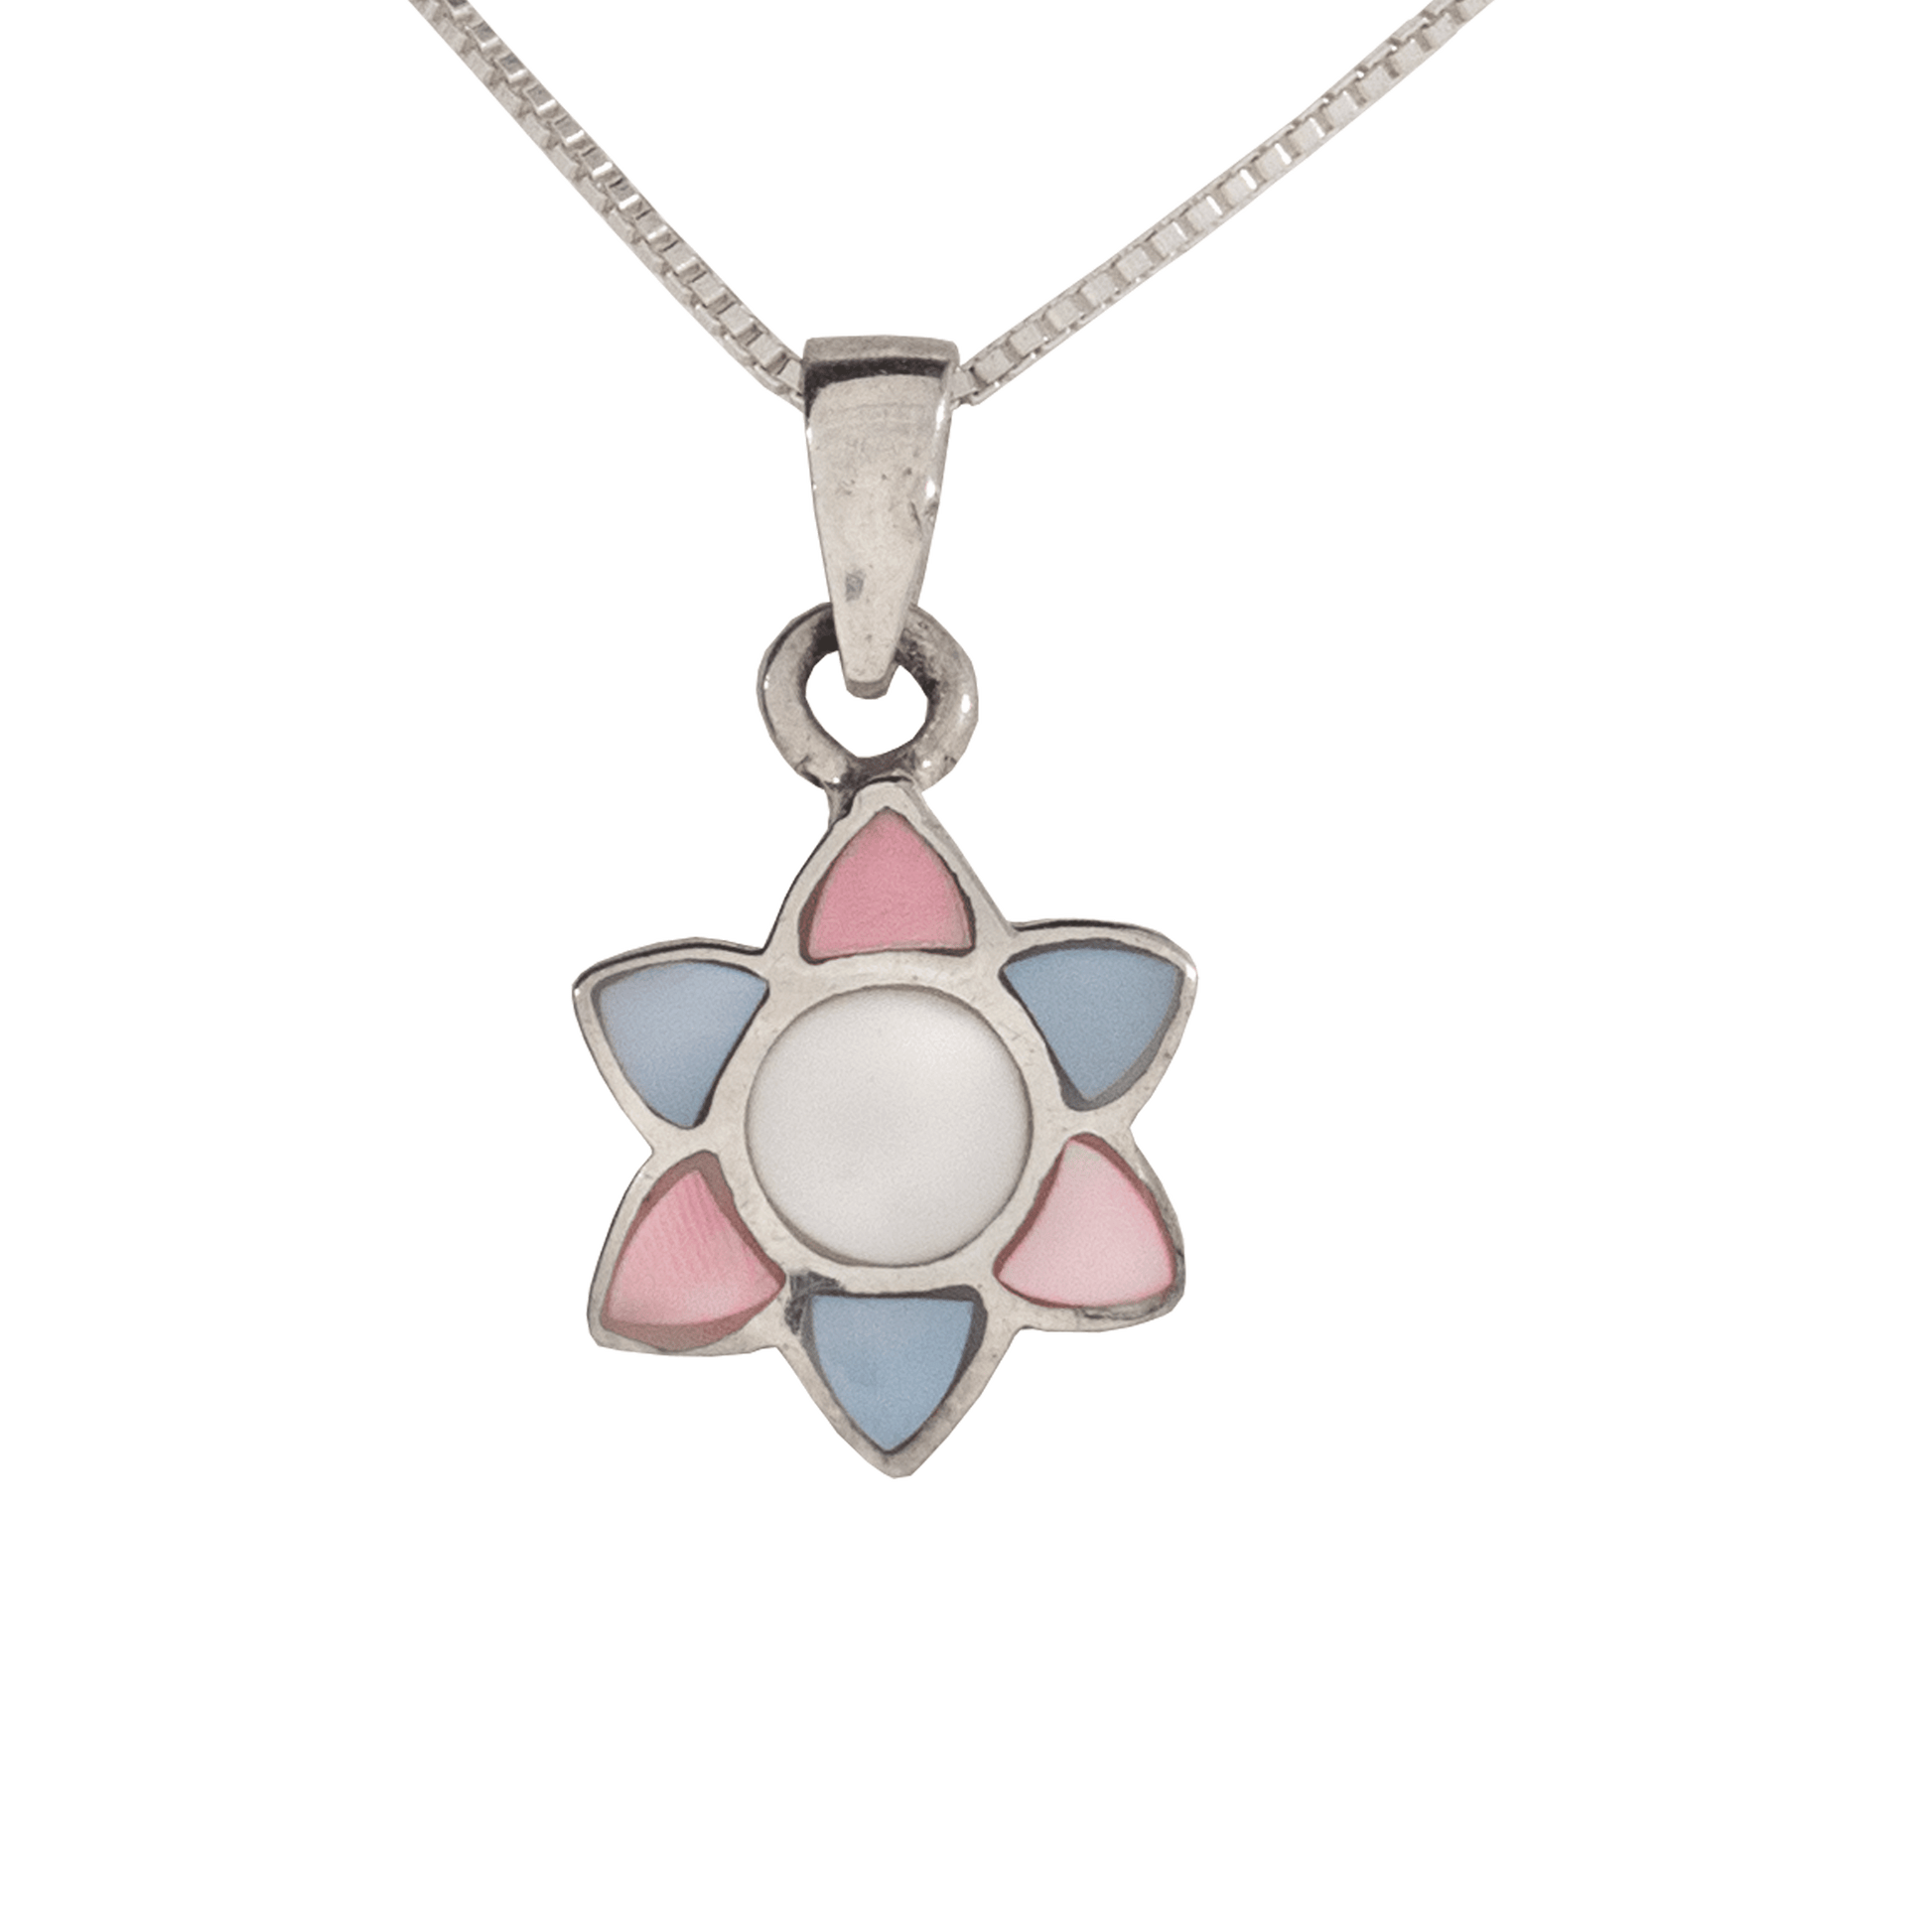 Mother of Pearl Flower Pendant NEcklace alternating Pastel Blue and Pink Petals white center on sterling silver chain